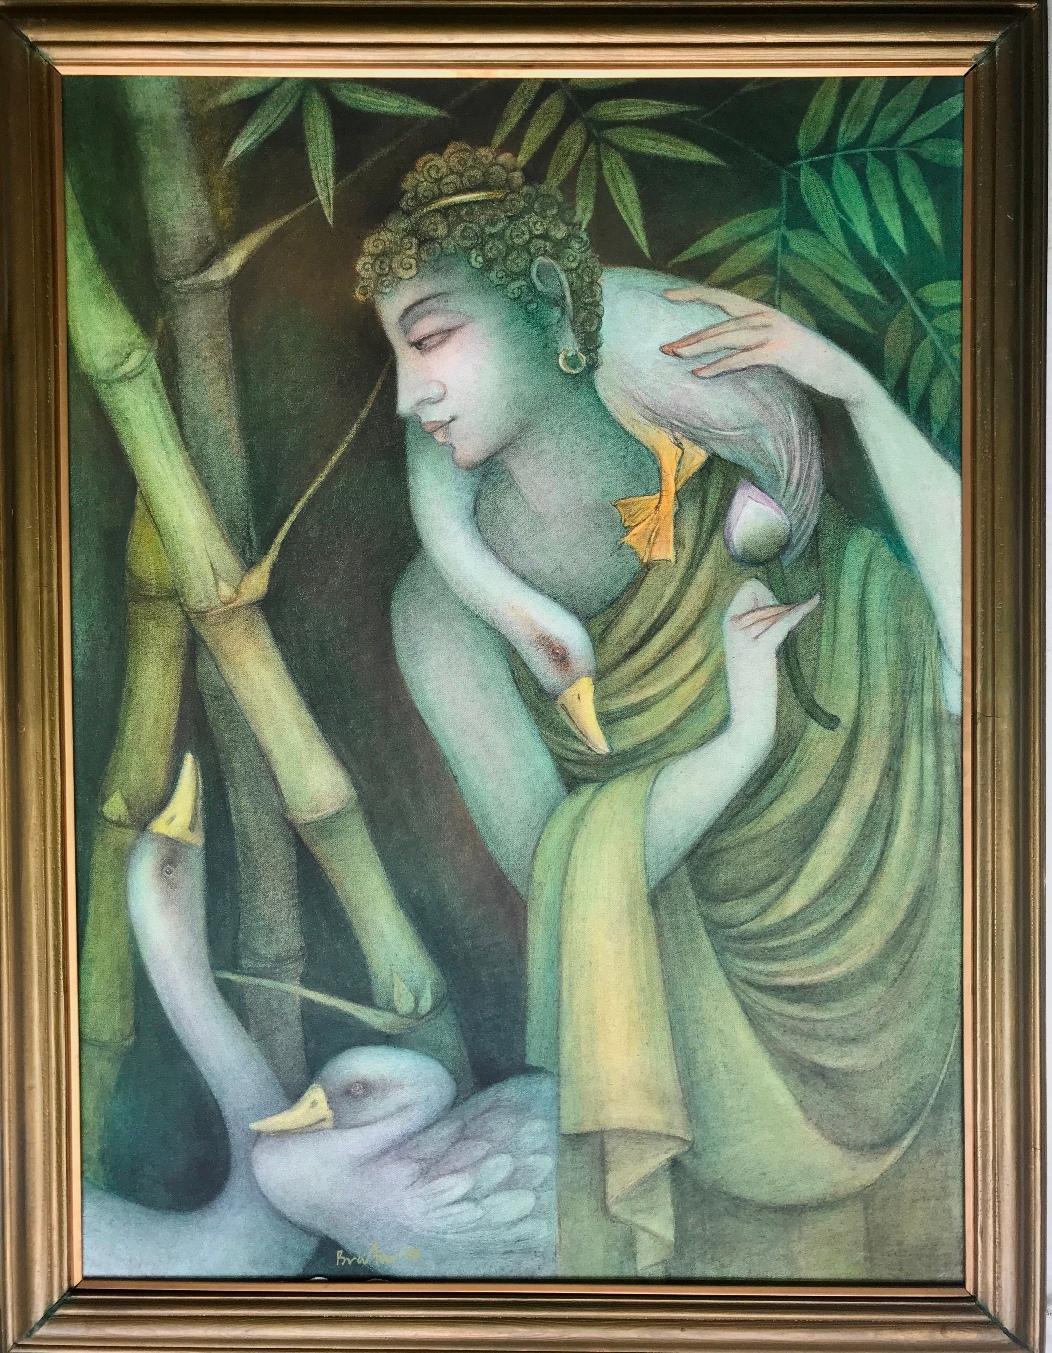 Bratin Khan Figurative Painting - Enlightened Purusha, Tempera on Canvas by Contemporary Artist "In Stock"